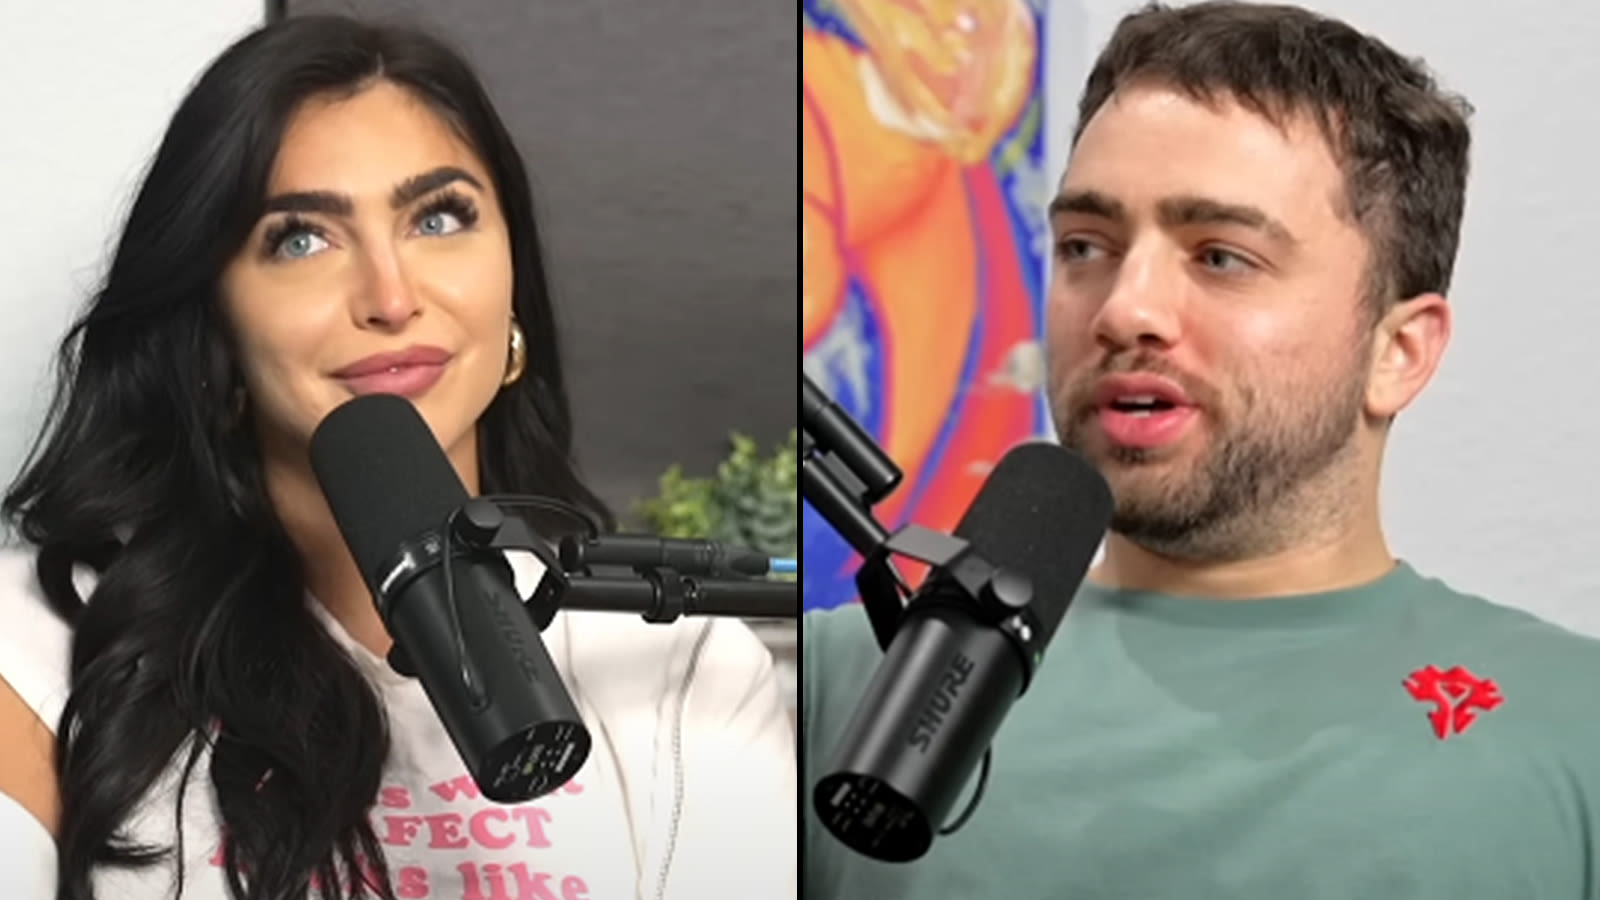 Mizkif reveals Emily Rinaudo isn’t actually his sister after years of speculation - Dexerto